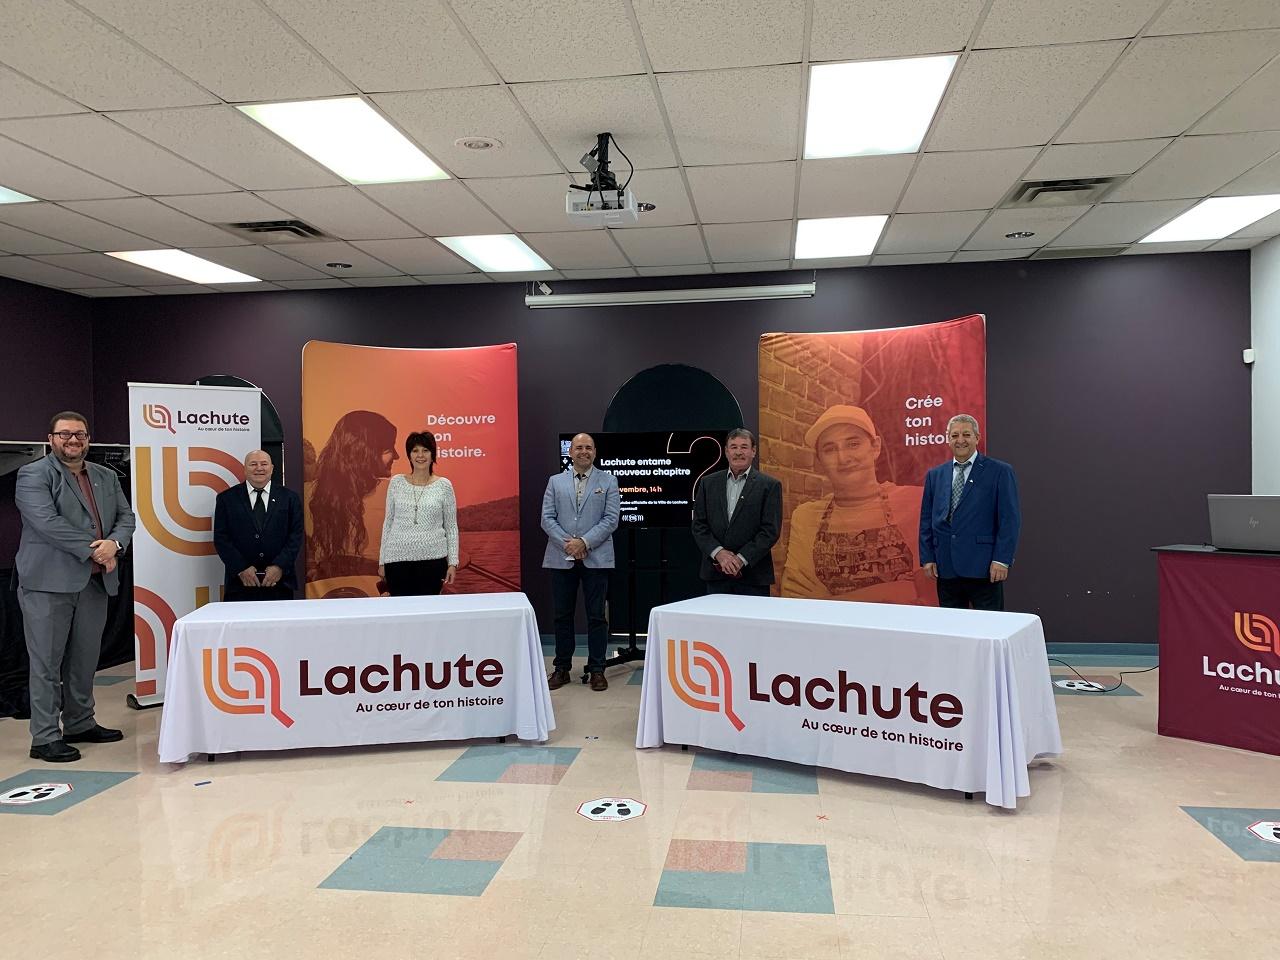 Lachute gets a new look with logo and slogan